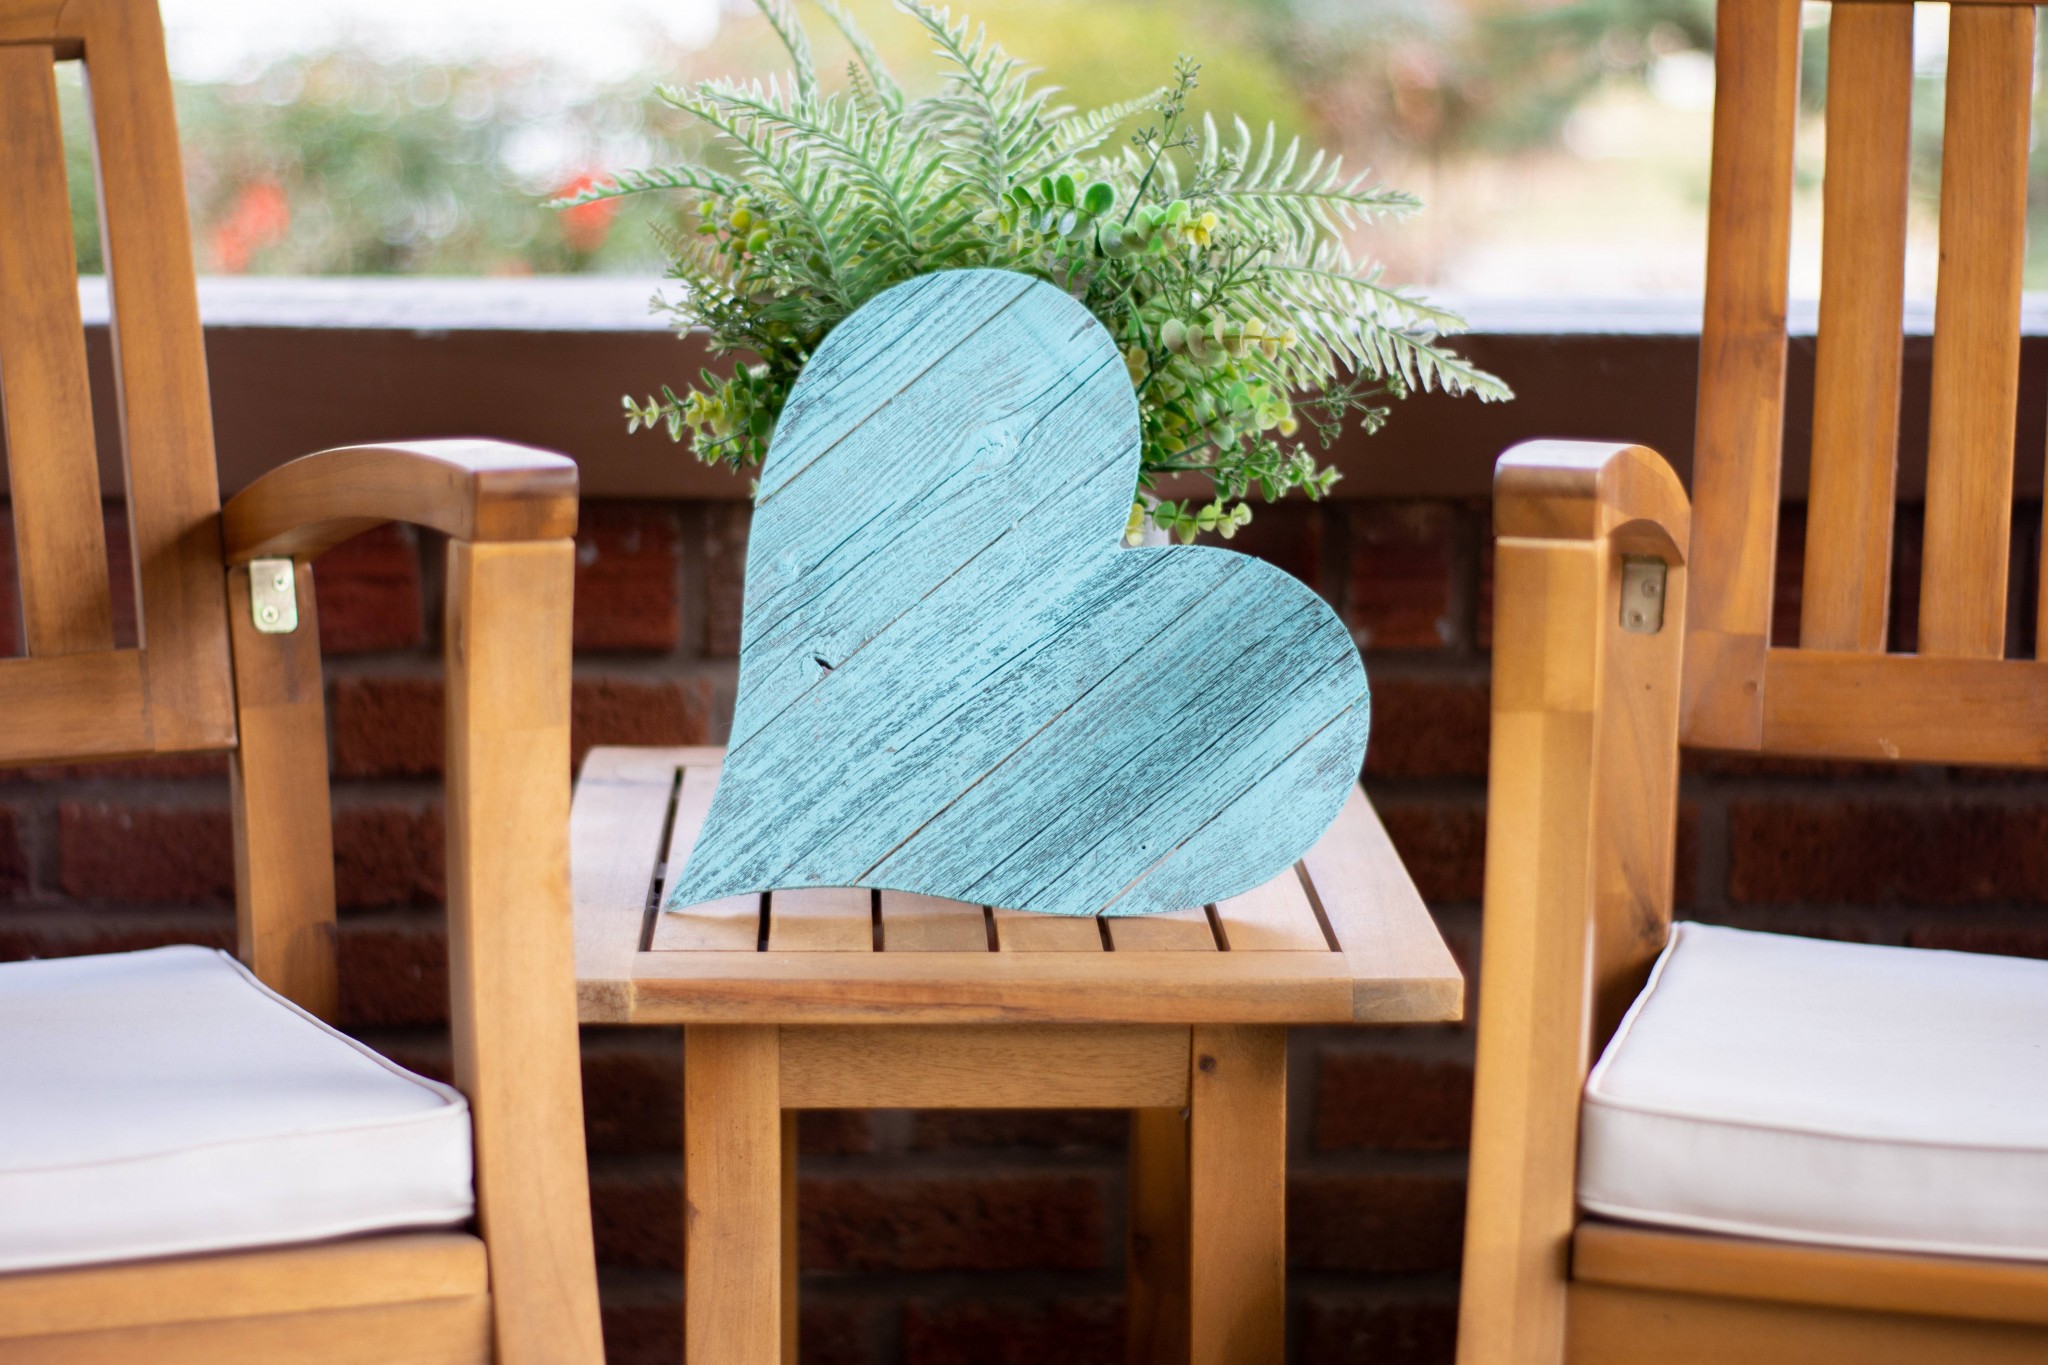 24" Rustic Farmhouse Turquoise Large Wooden Heart